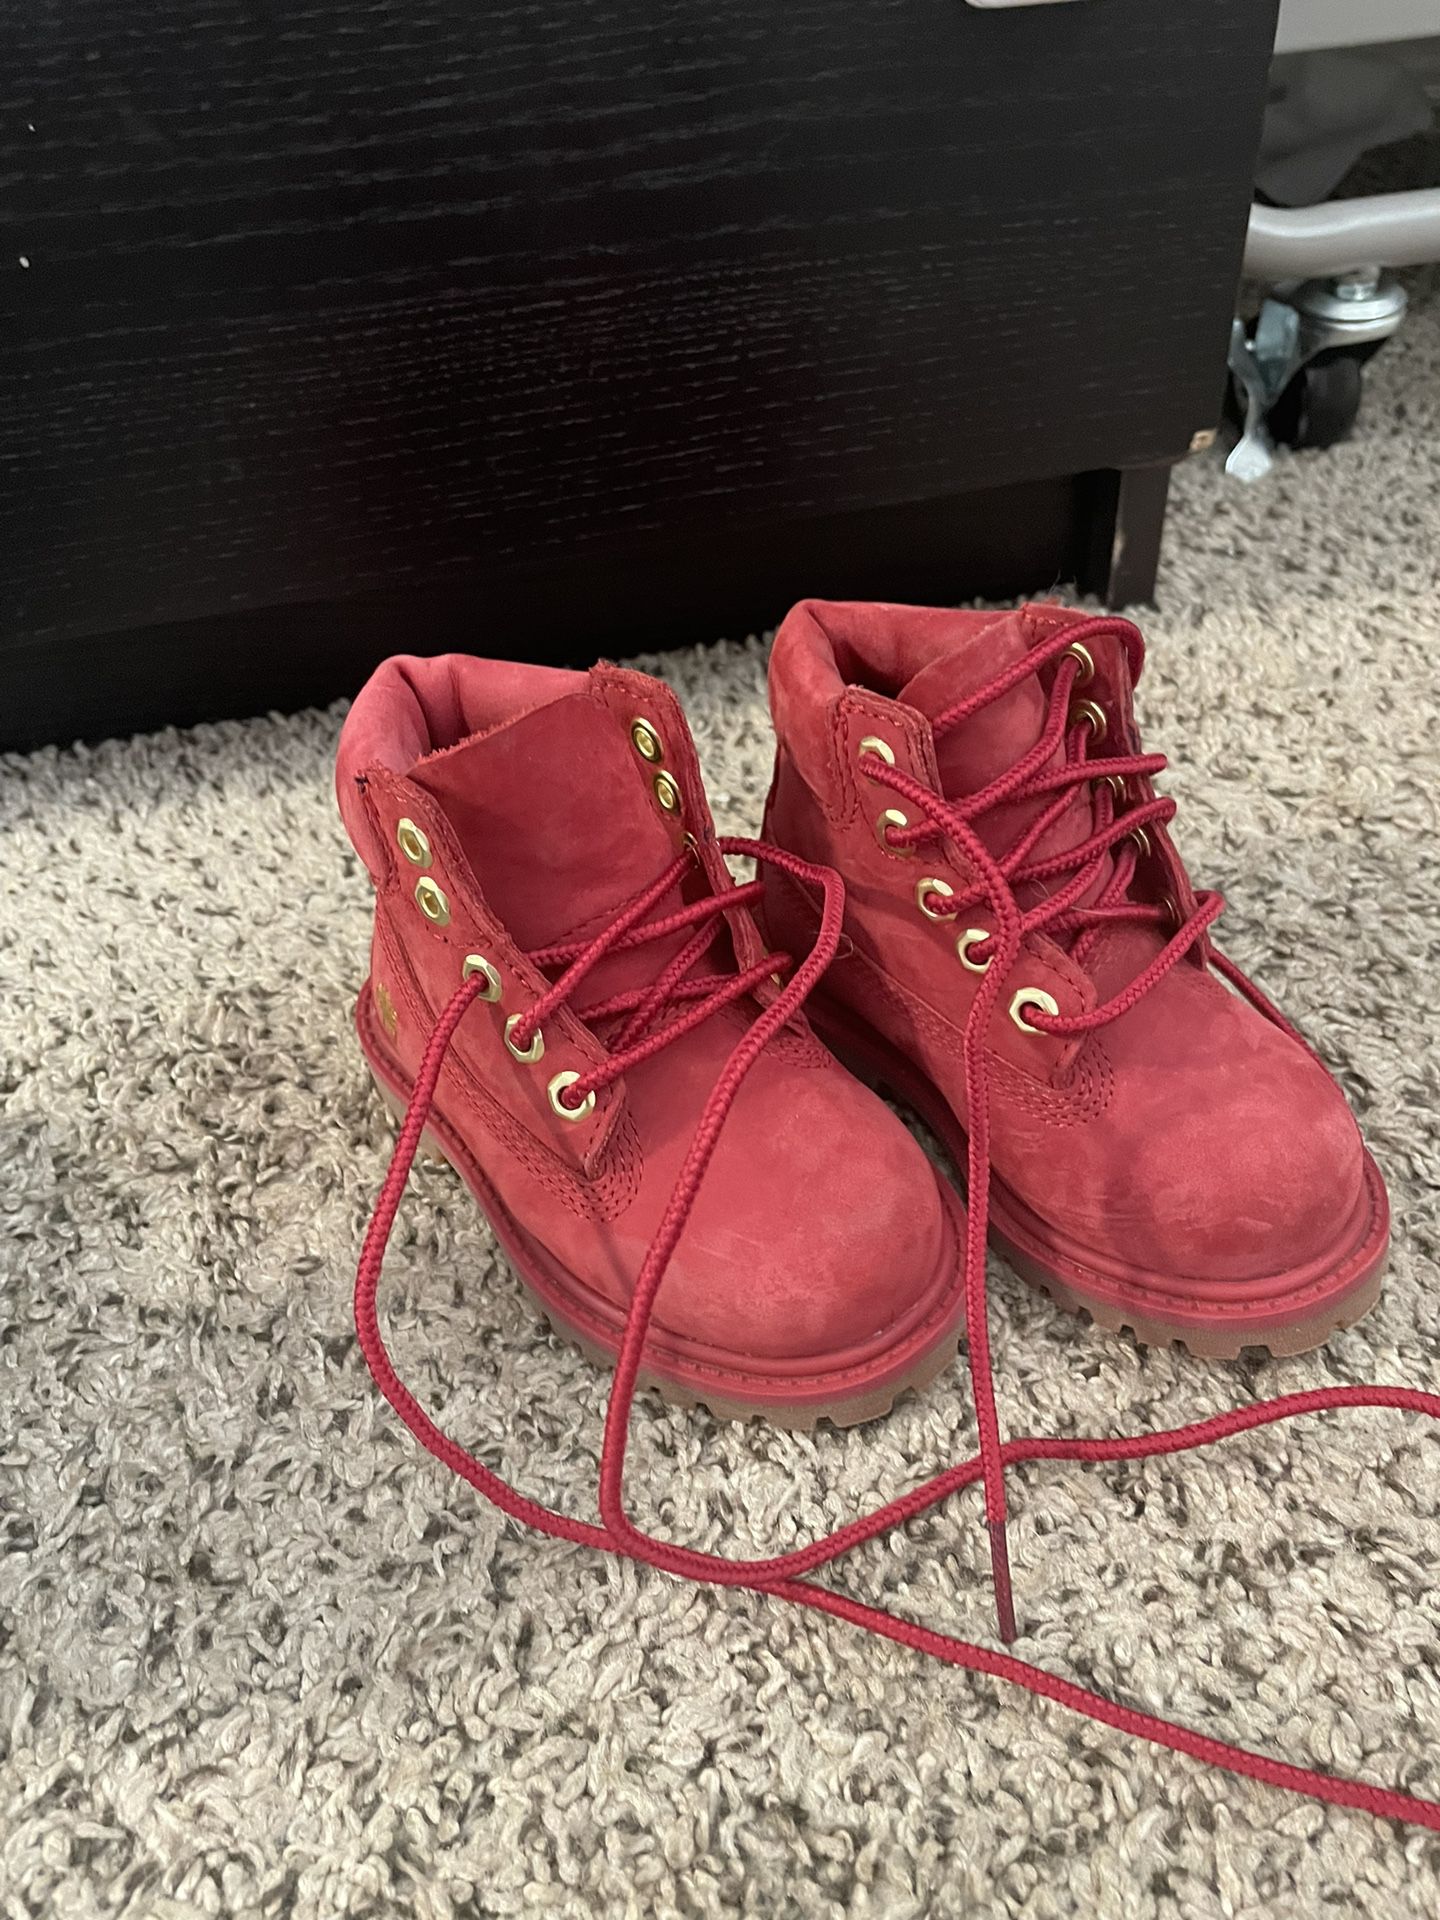 Red Toddler Timberland Boots 